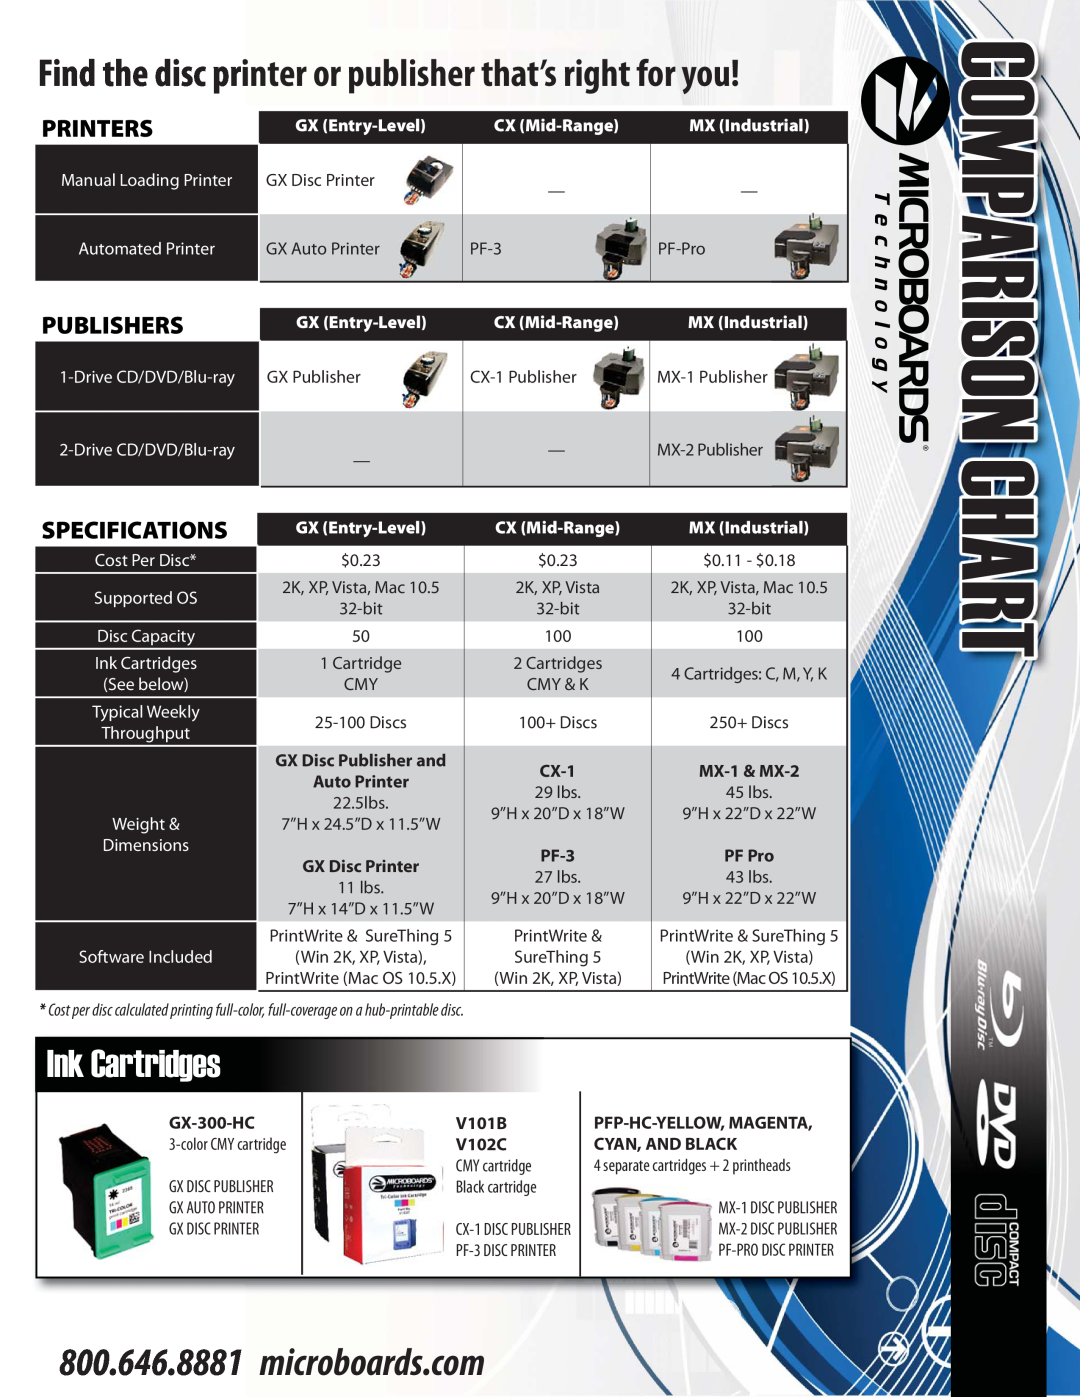 MicroBoards Technology MX-1 Chart, Ink Cartridges, 1717, microboards.com, Printers, Publishers, Specifications, CX-1, PF-3 